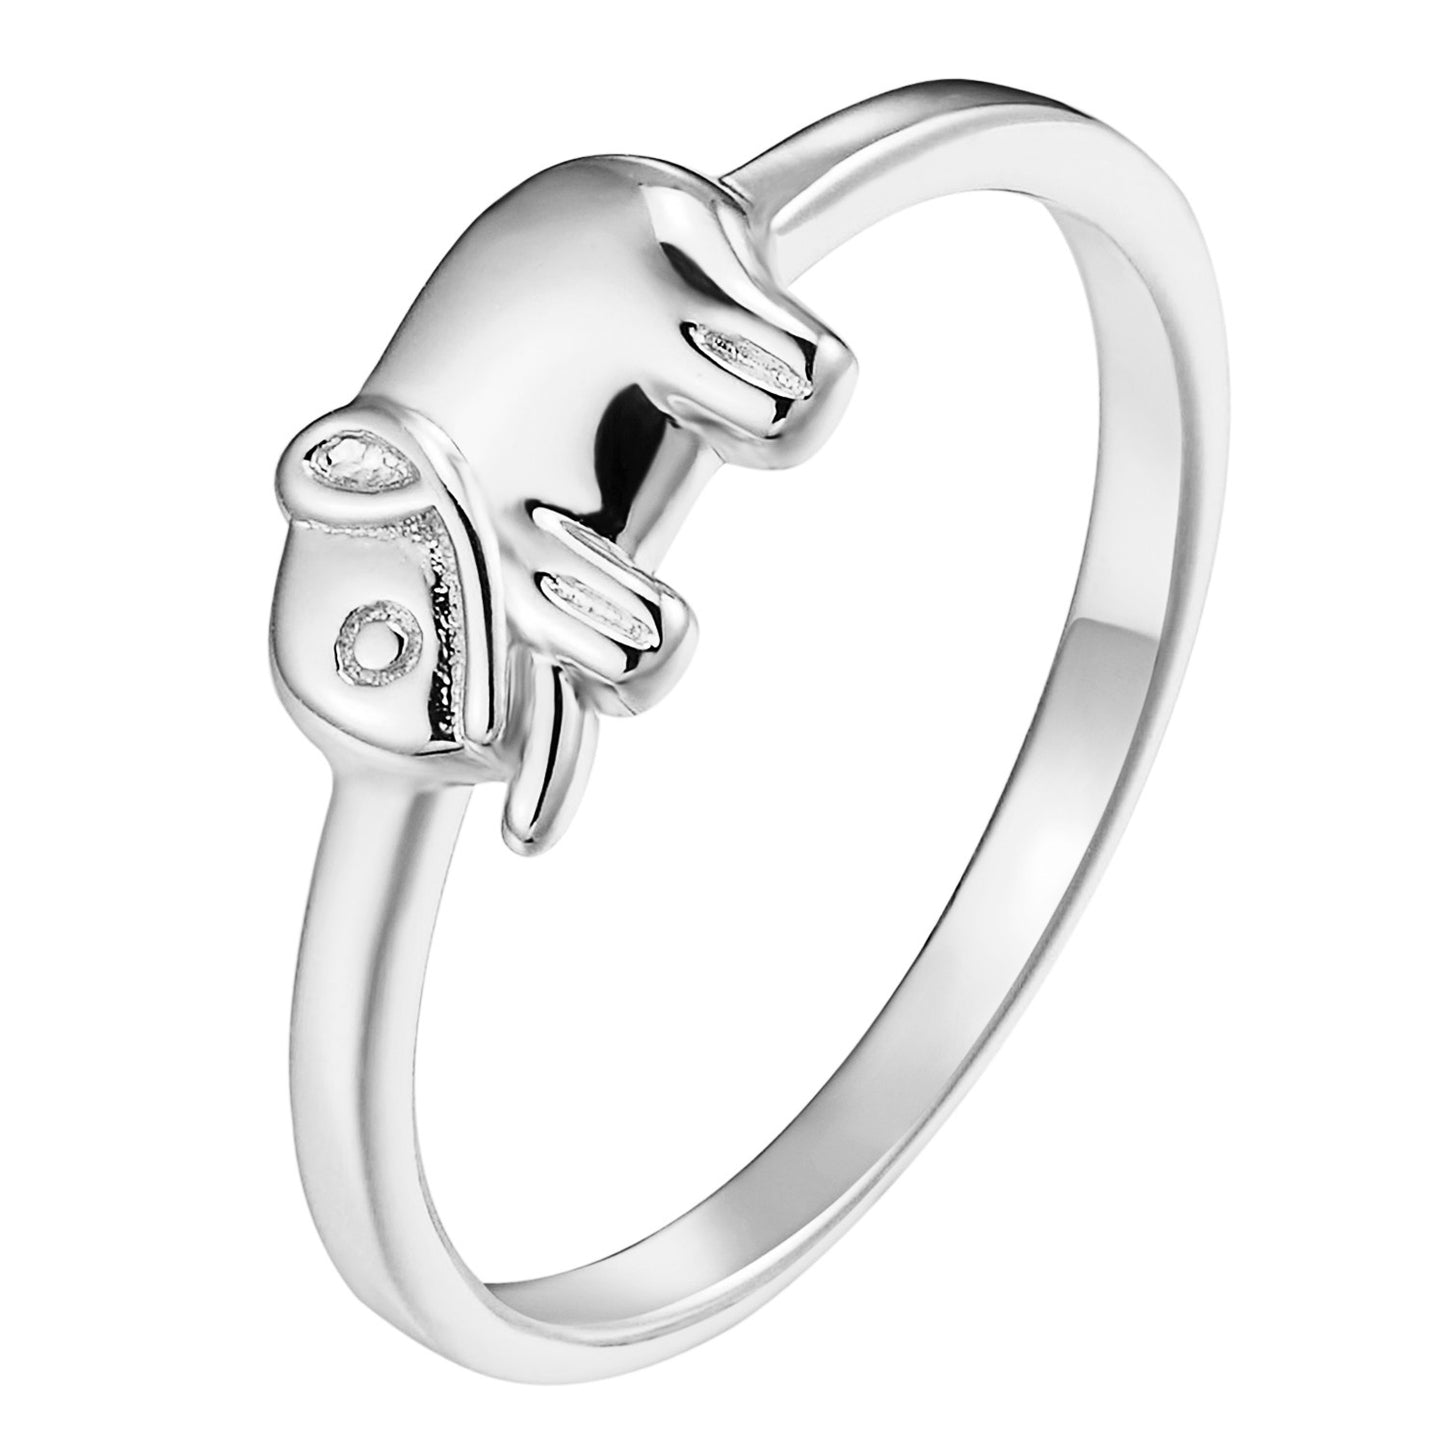 Sterling Silver Womens Elephant Ring 925 Trunk Up Unique Style Sizes 6 7 8